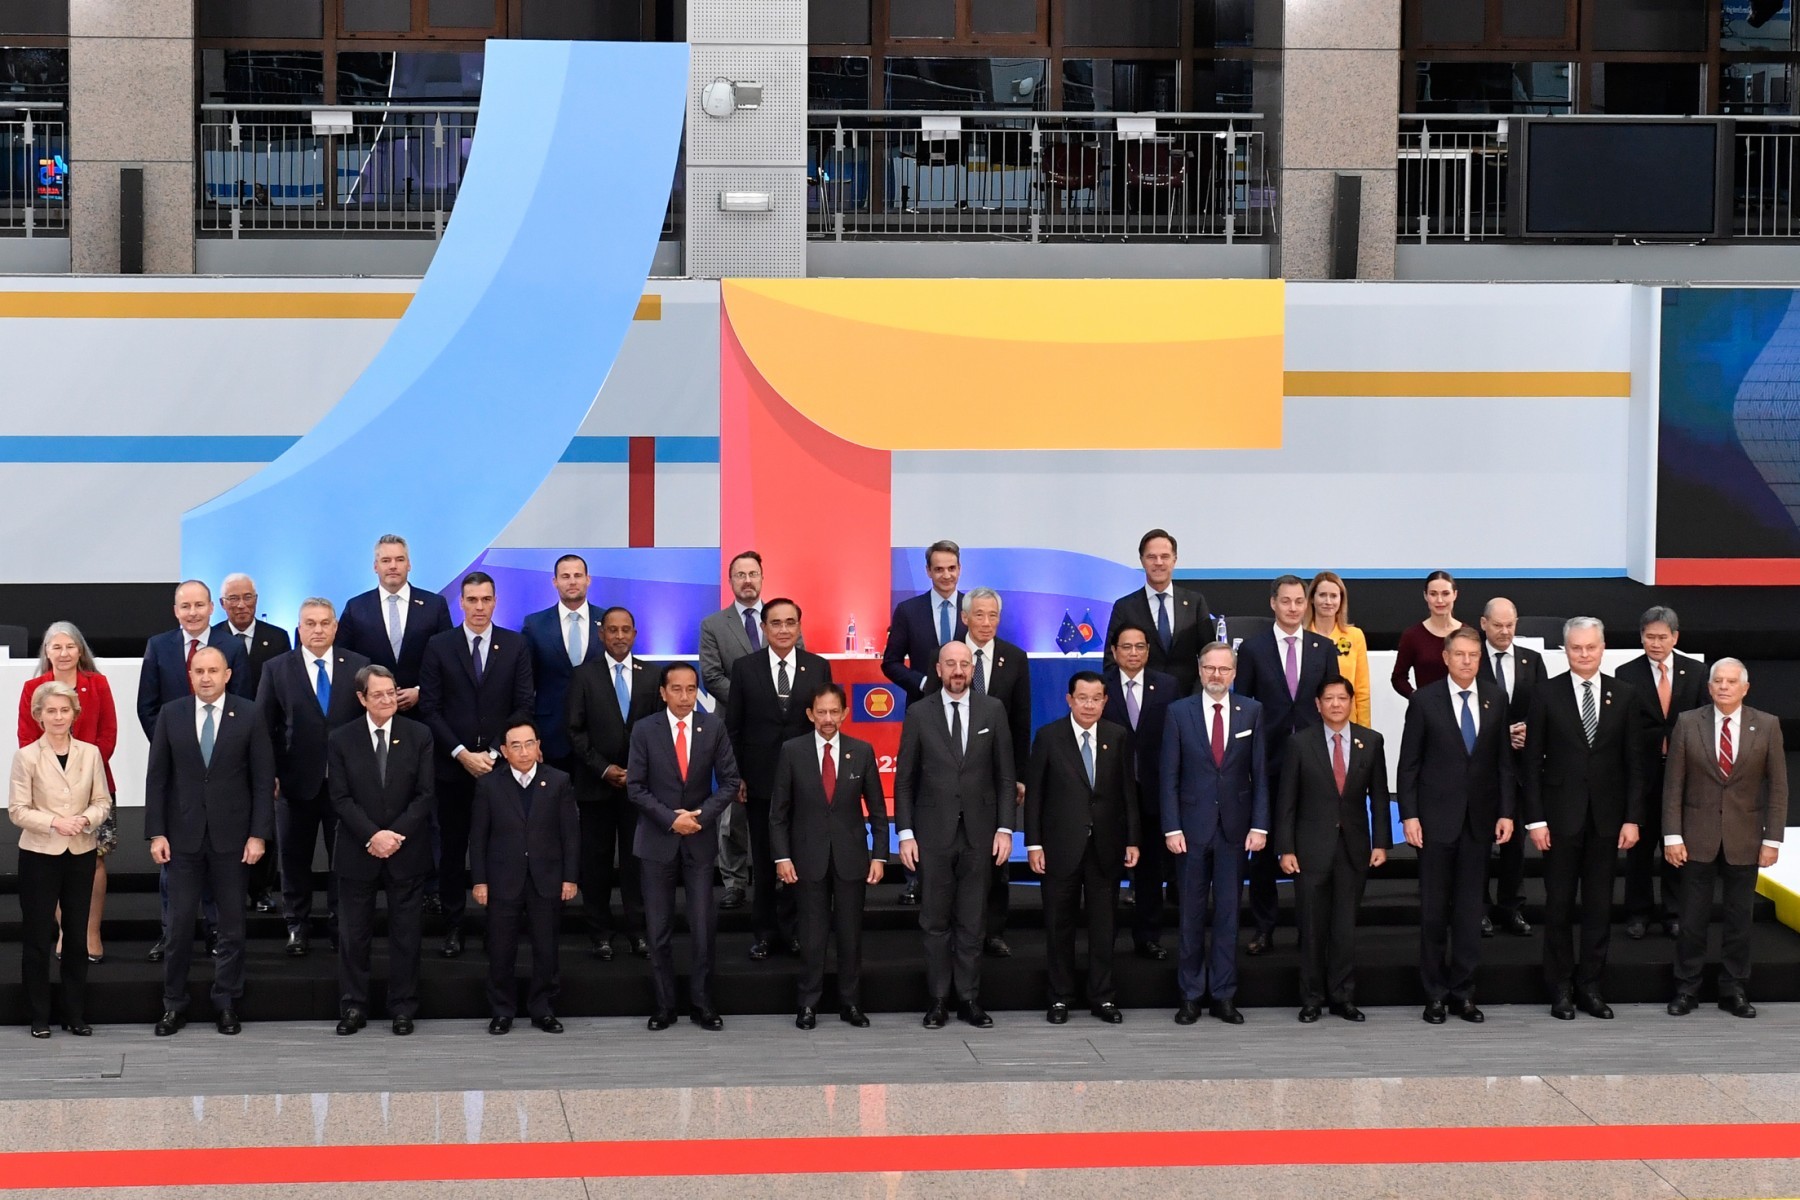 On December 14, 2022, at the European Council offices in Brussels, heads of state gather for a family photo prior to the EU-ASEAN summit.